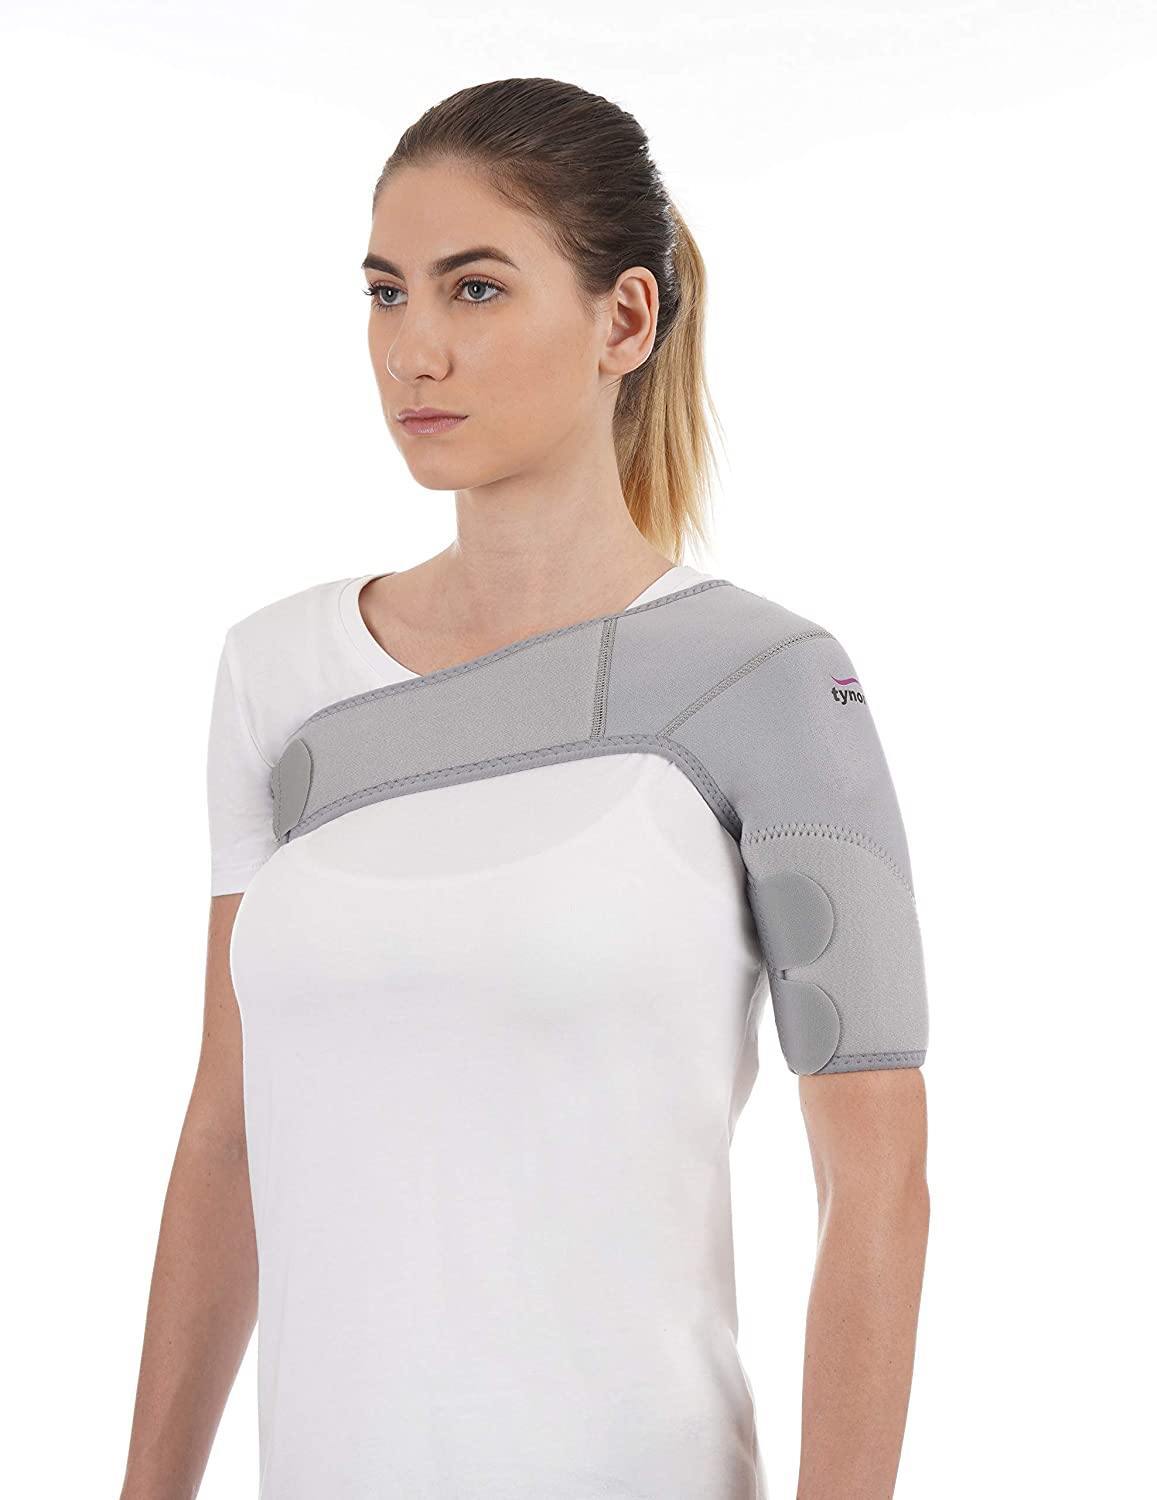 Tynor Shoulder Support (Neo) J-14-HEALTH & PERSONAL CARE-dealsplant